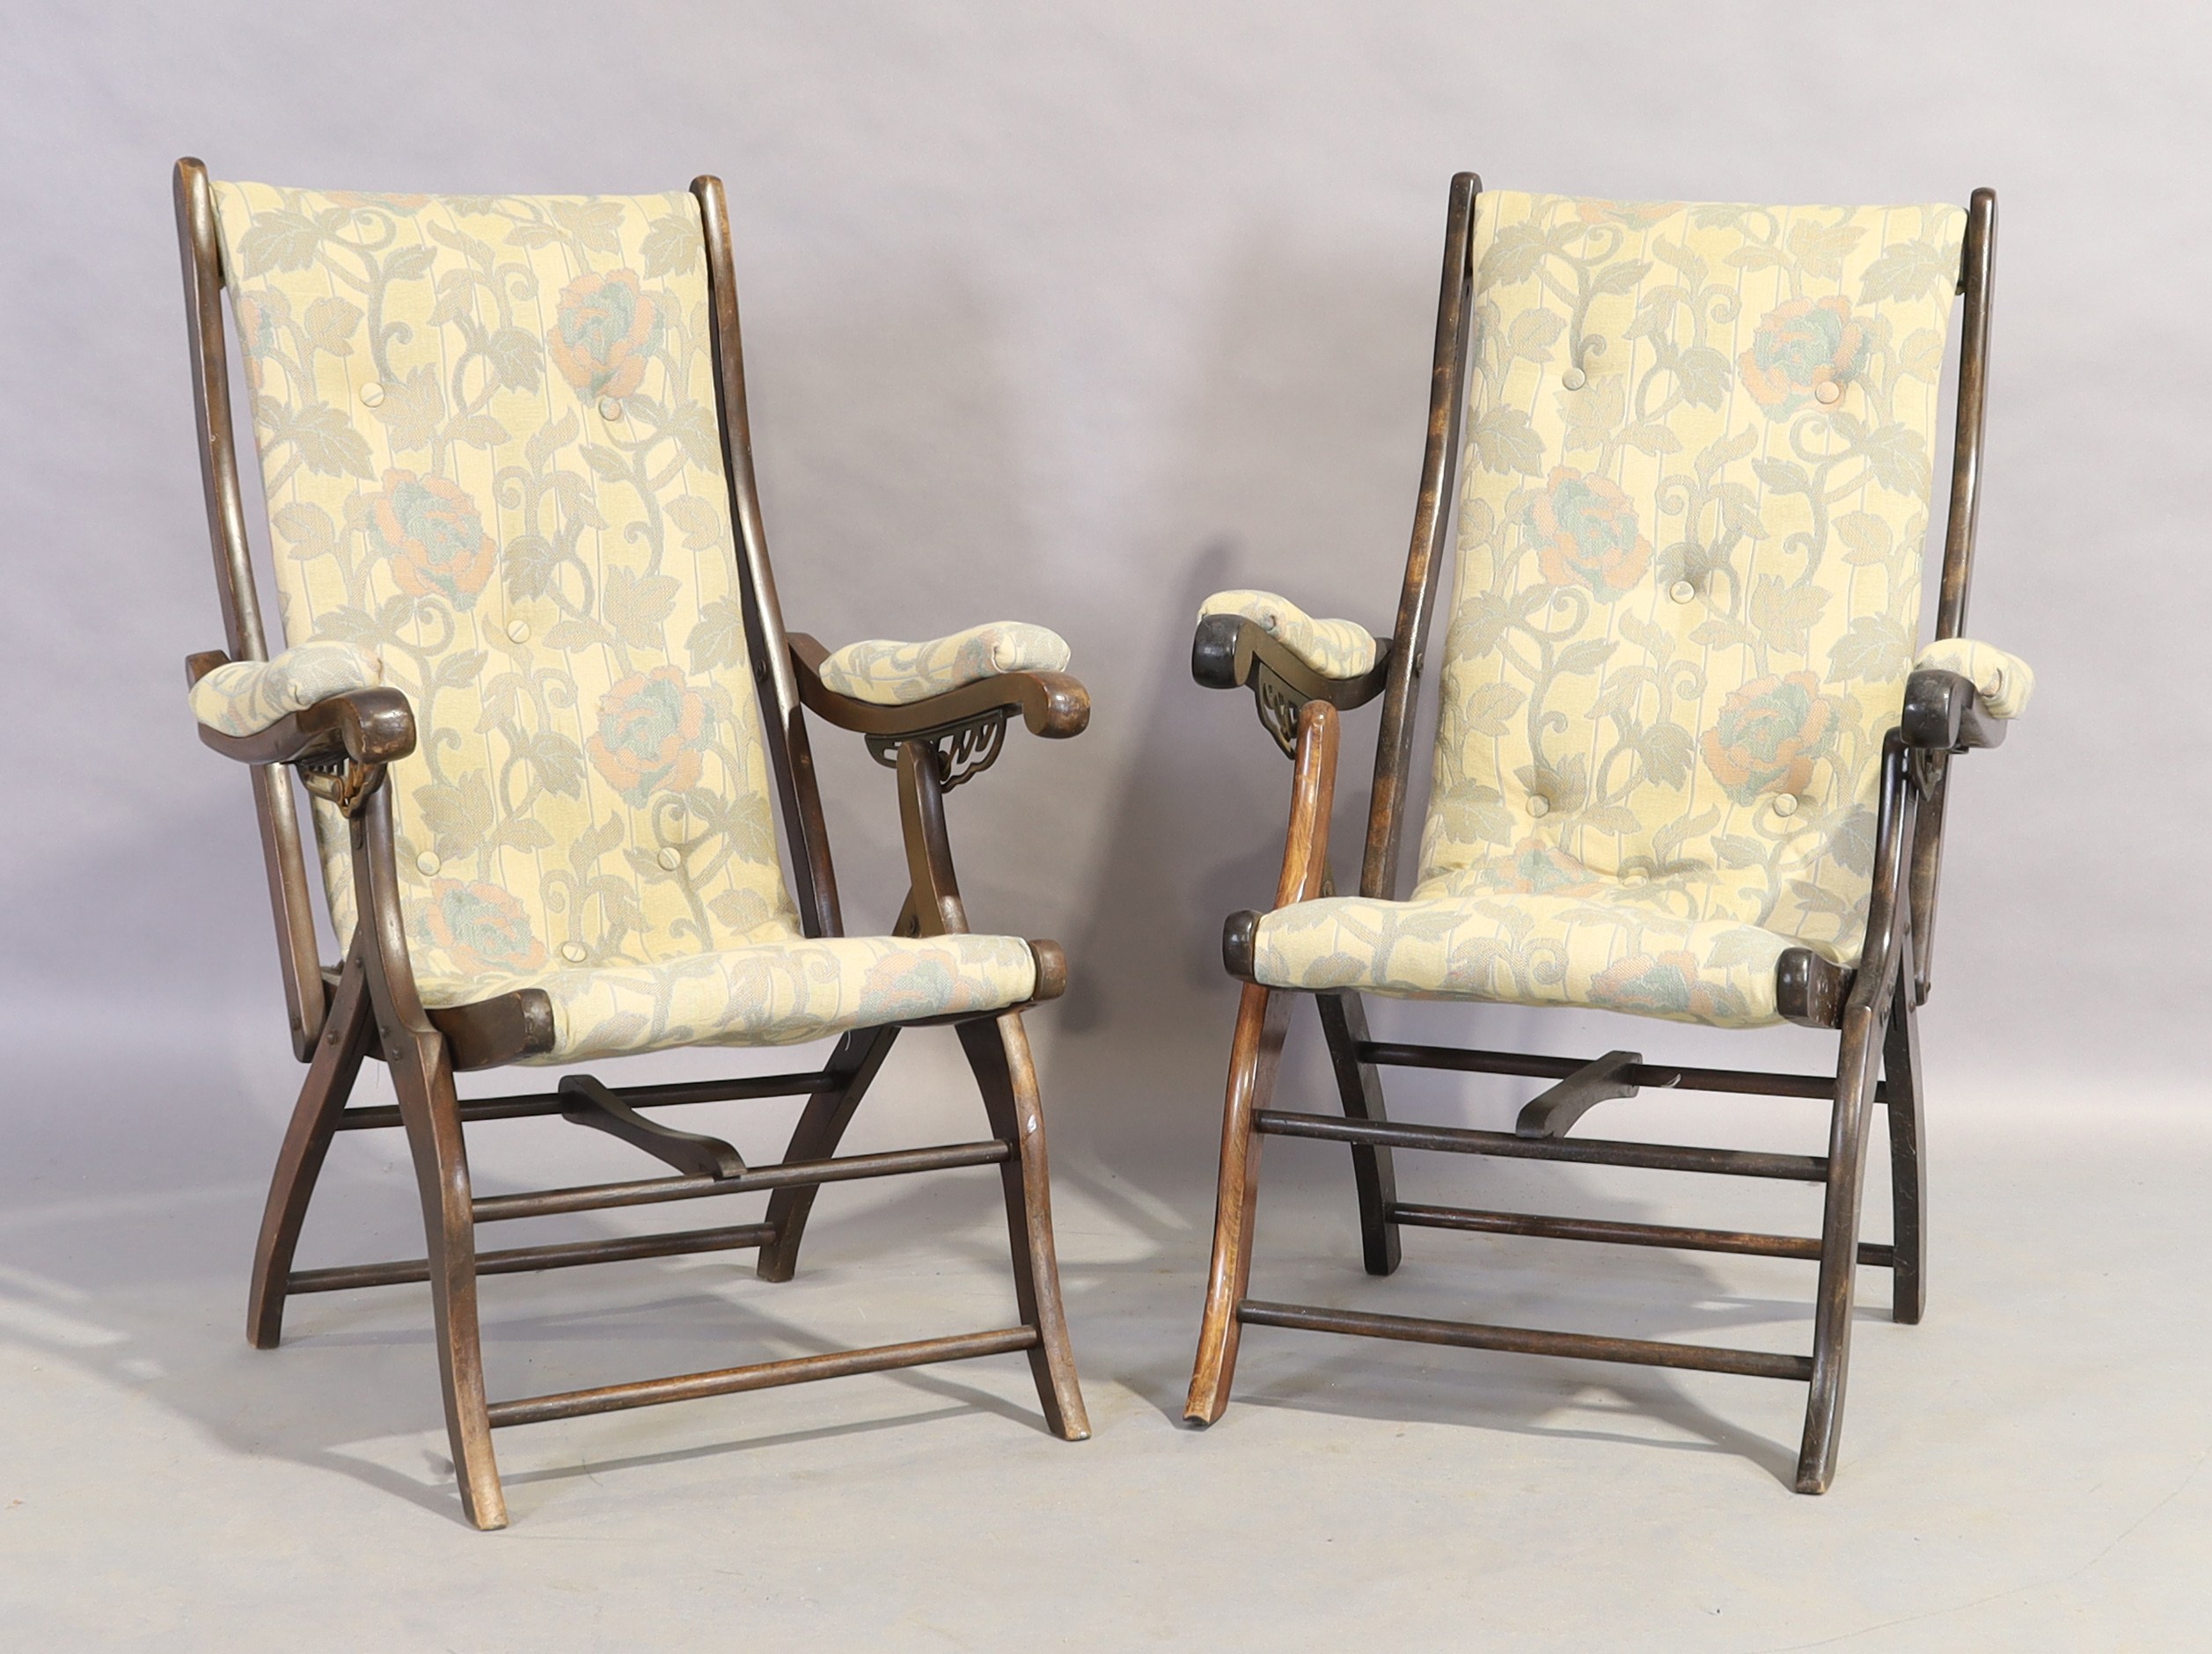 A pair of Edwardian stained beech folding steamer chairs, first quarter 20th century (2) Provena...